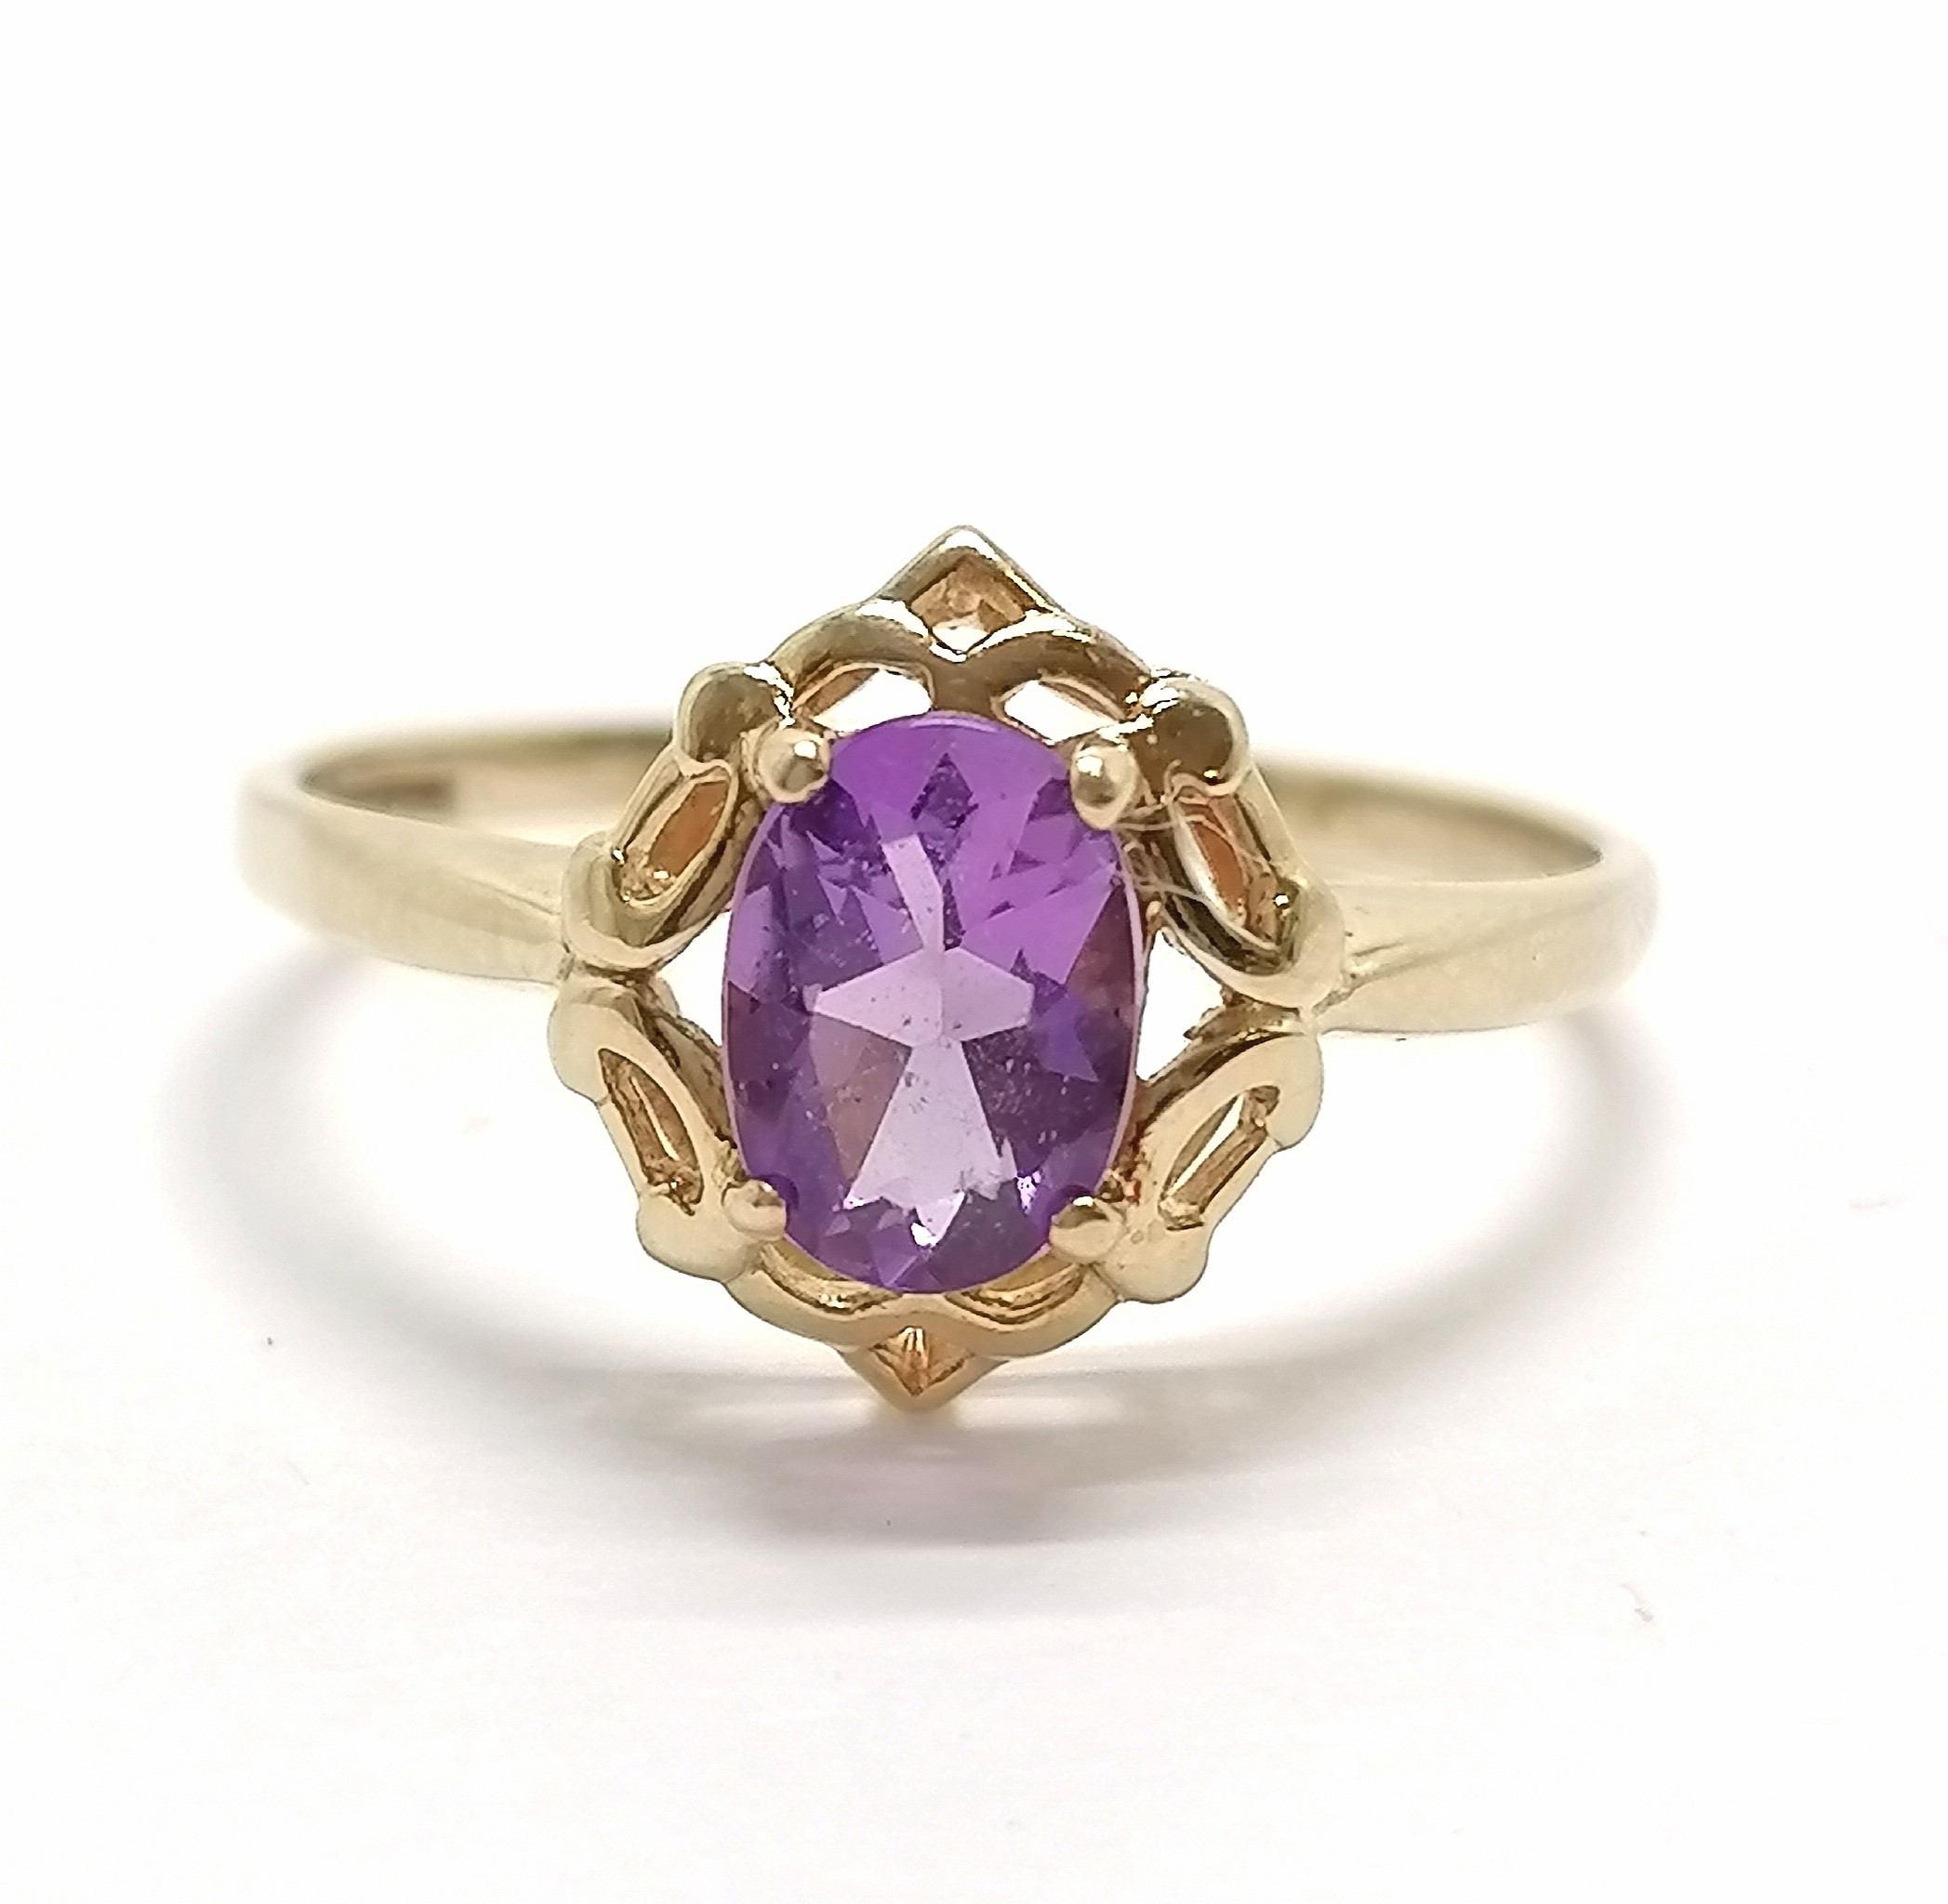 9ct hallmarked gold amethyst oval stone set ring - size P½ & 1.6g total weight